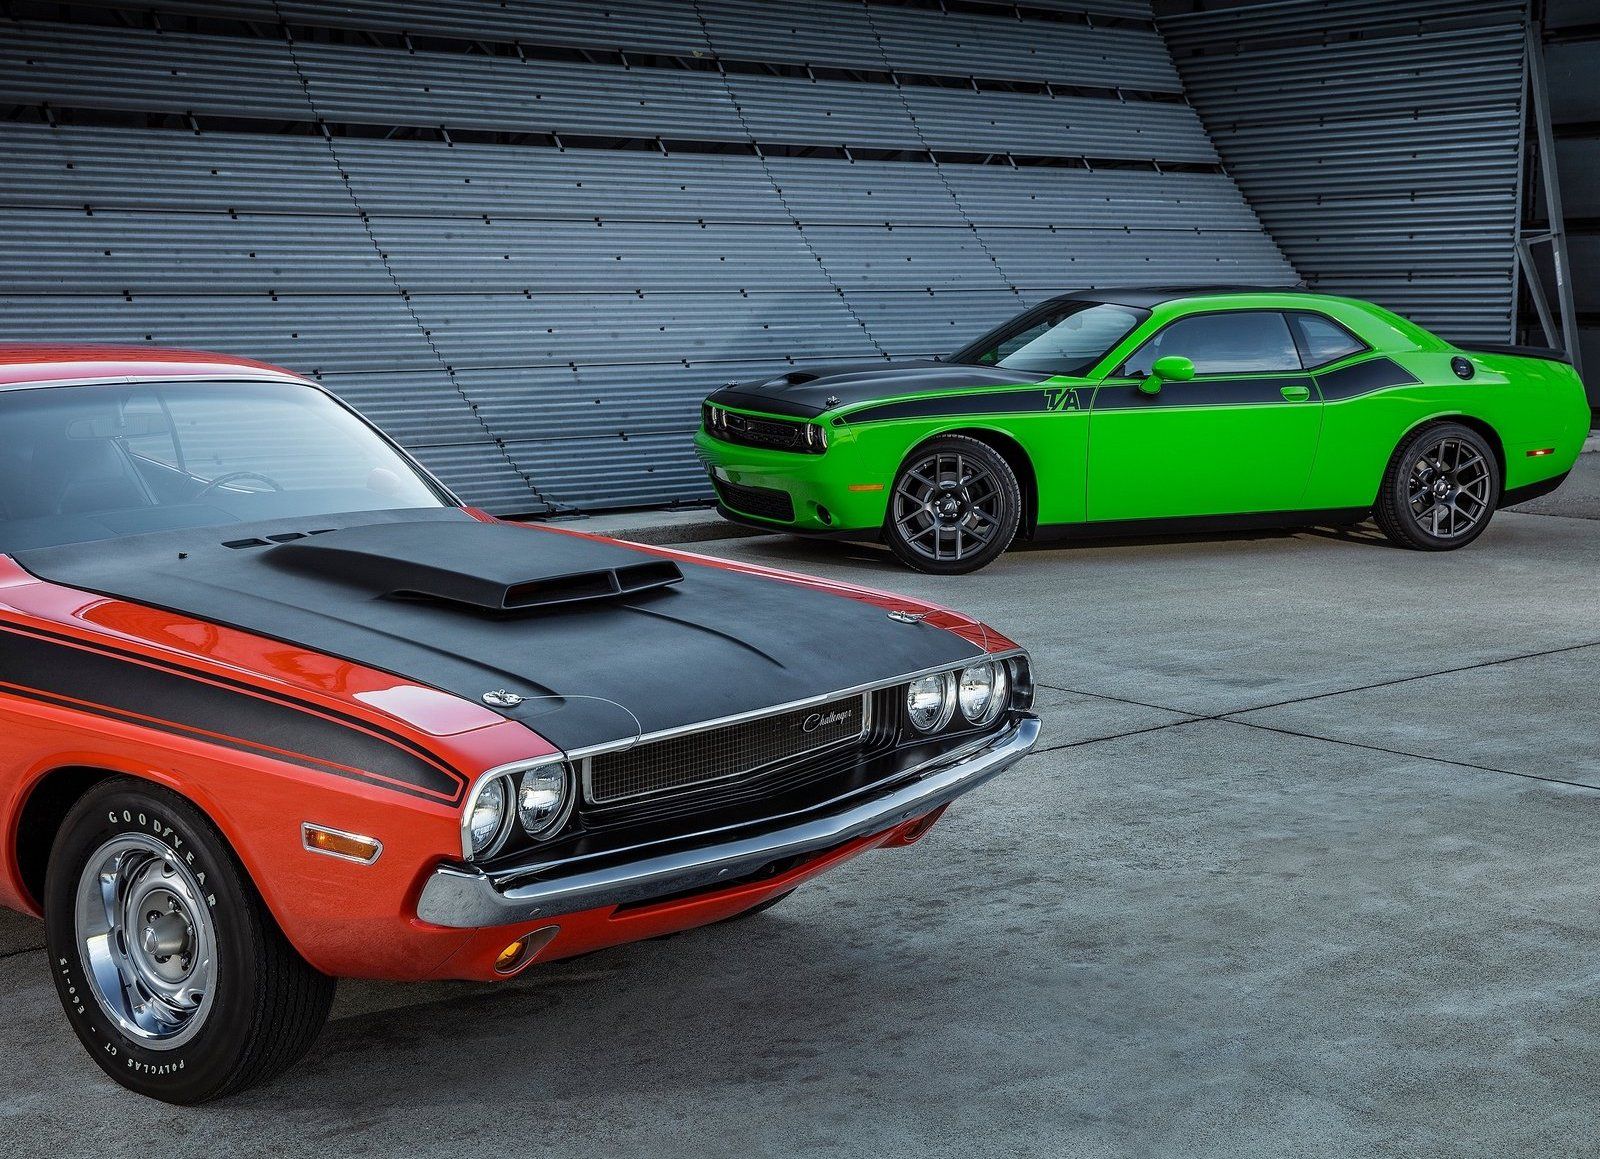 1970's and 2020's Dodge Challengers in a photo op